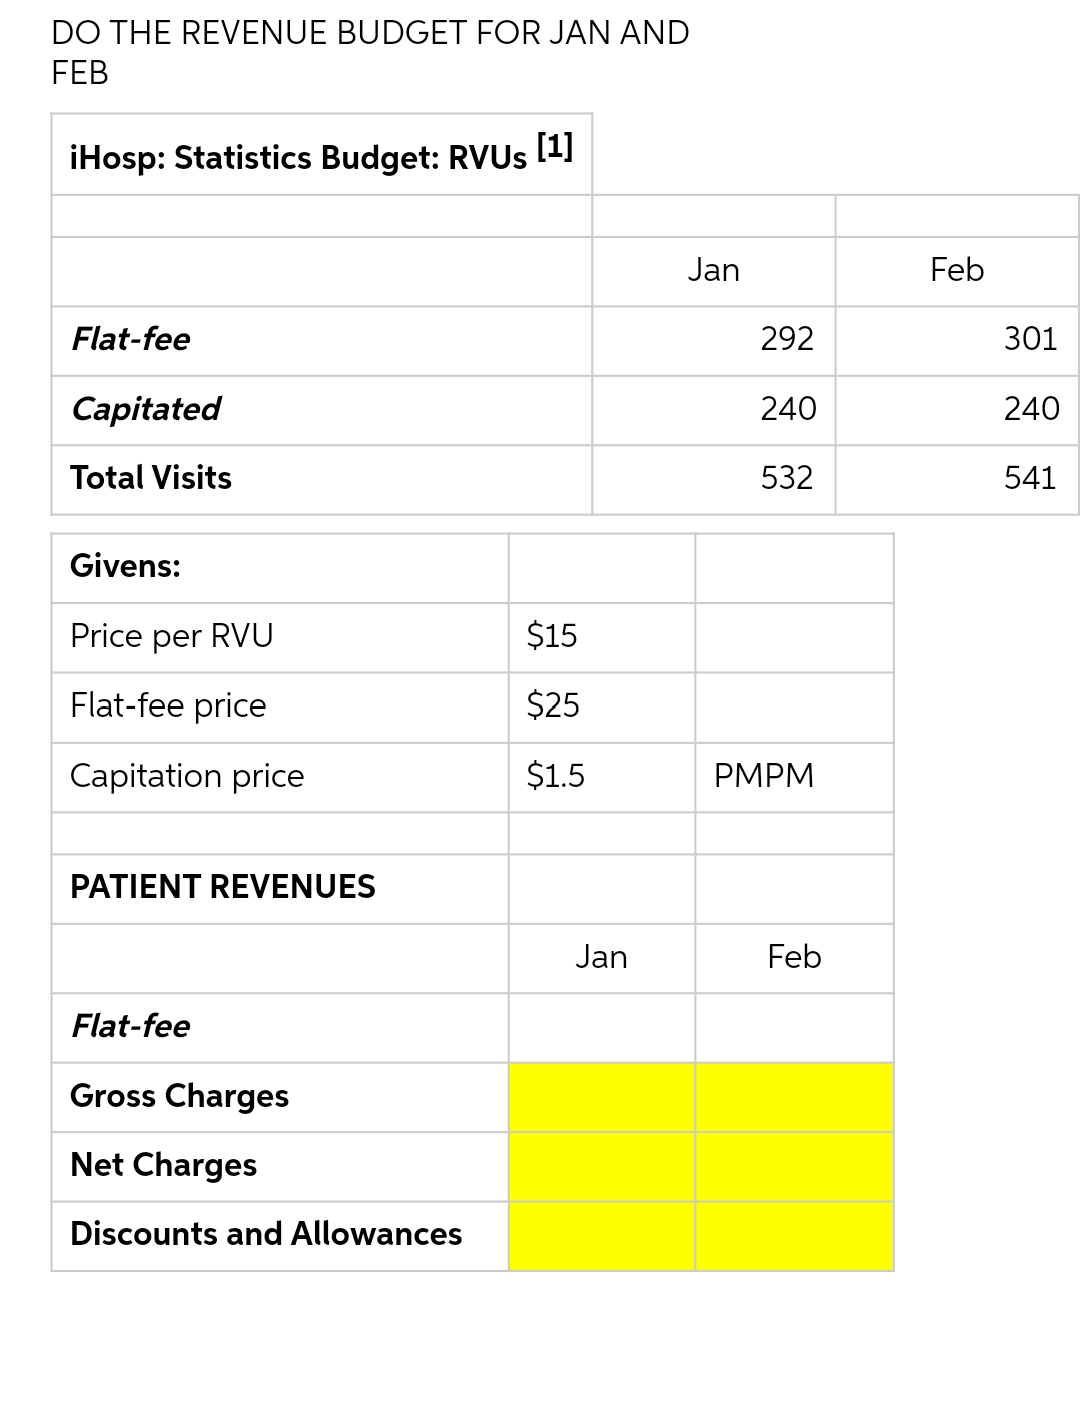 DO THE REVENUE BUDGET FOR JAN AND
FEB
iHosp: Statistics Budget: RVUs [1)
Jan
Feb
Flat-fee
292
301
Capitated
240
240
Total Visits
532
541
Givens:
Price per RVU
$15
Flat-fee price
$25
Capitation price
$1.5
PMPM
PATIENT REVENUES
Jan
Feb
Flat-fee
Gross Charges
Net Charges
Discounts and Allowances
